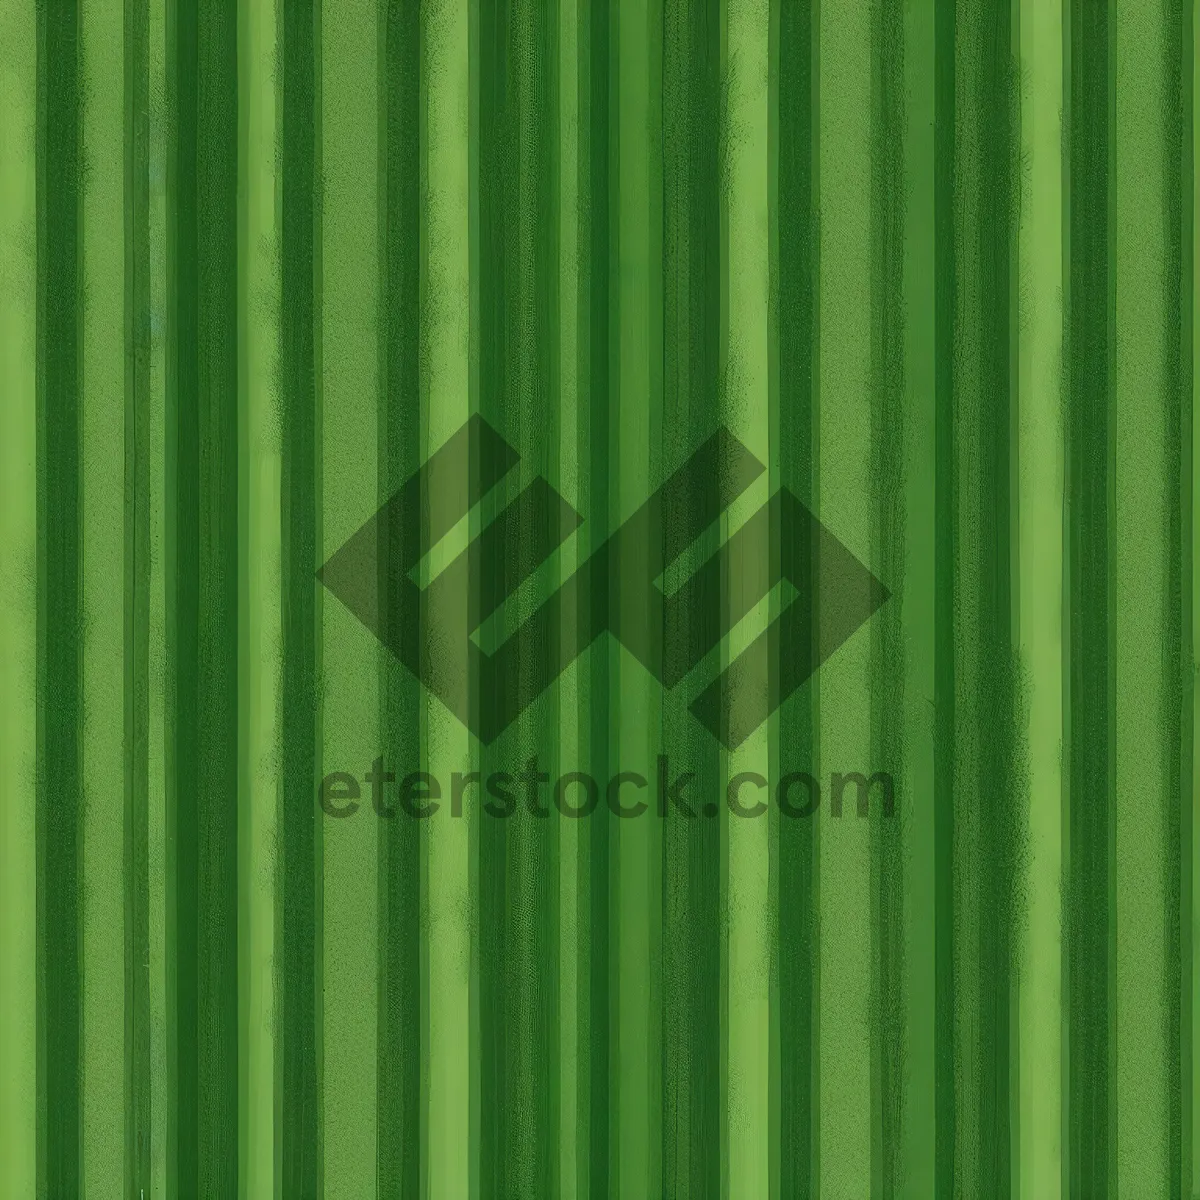 Picture of Bright Bamboo Texture: Vibrant Leaf Pattern for Summer Wallpaper